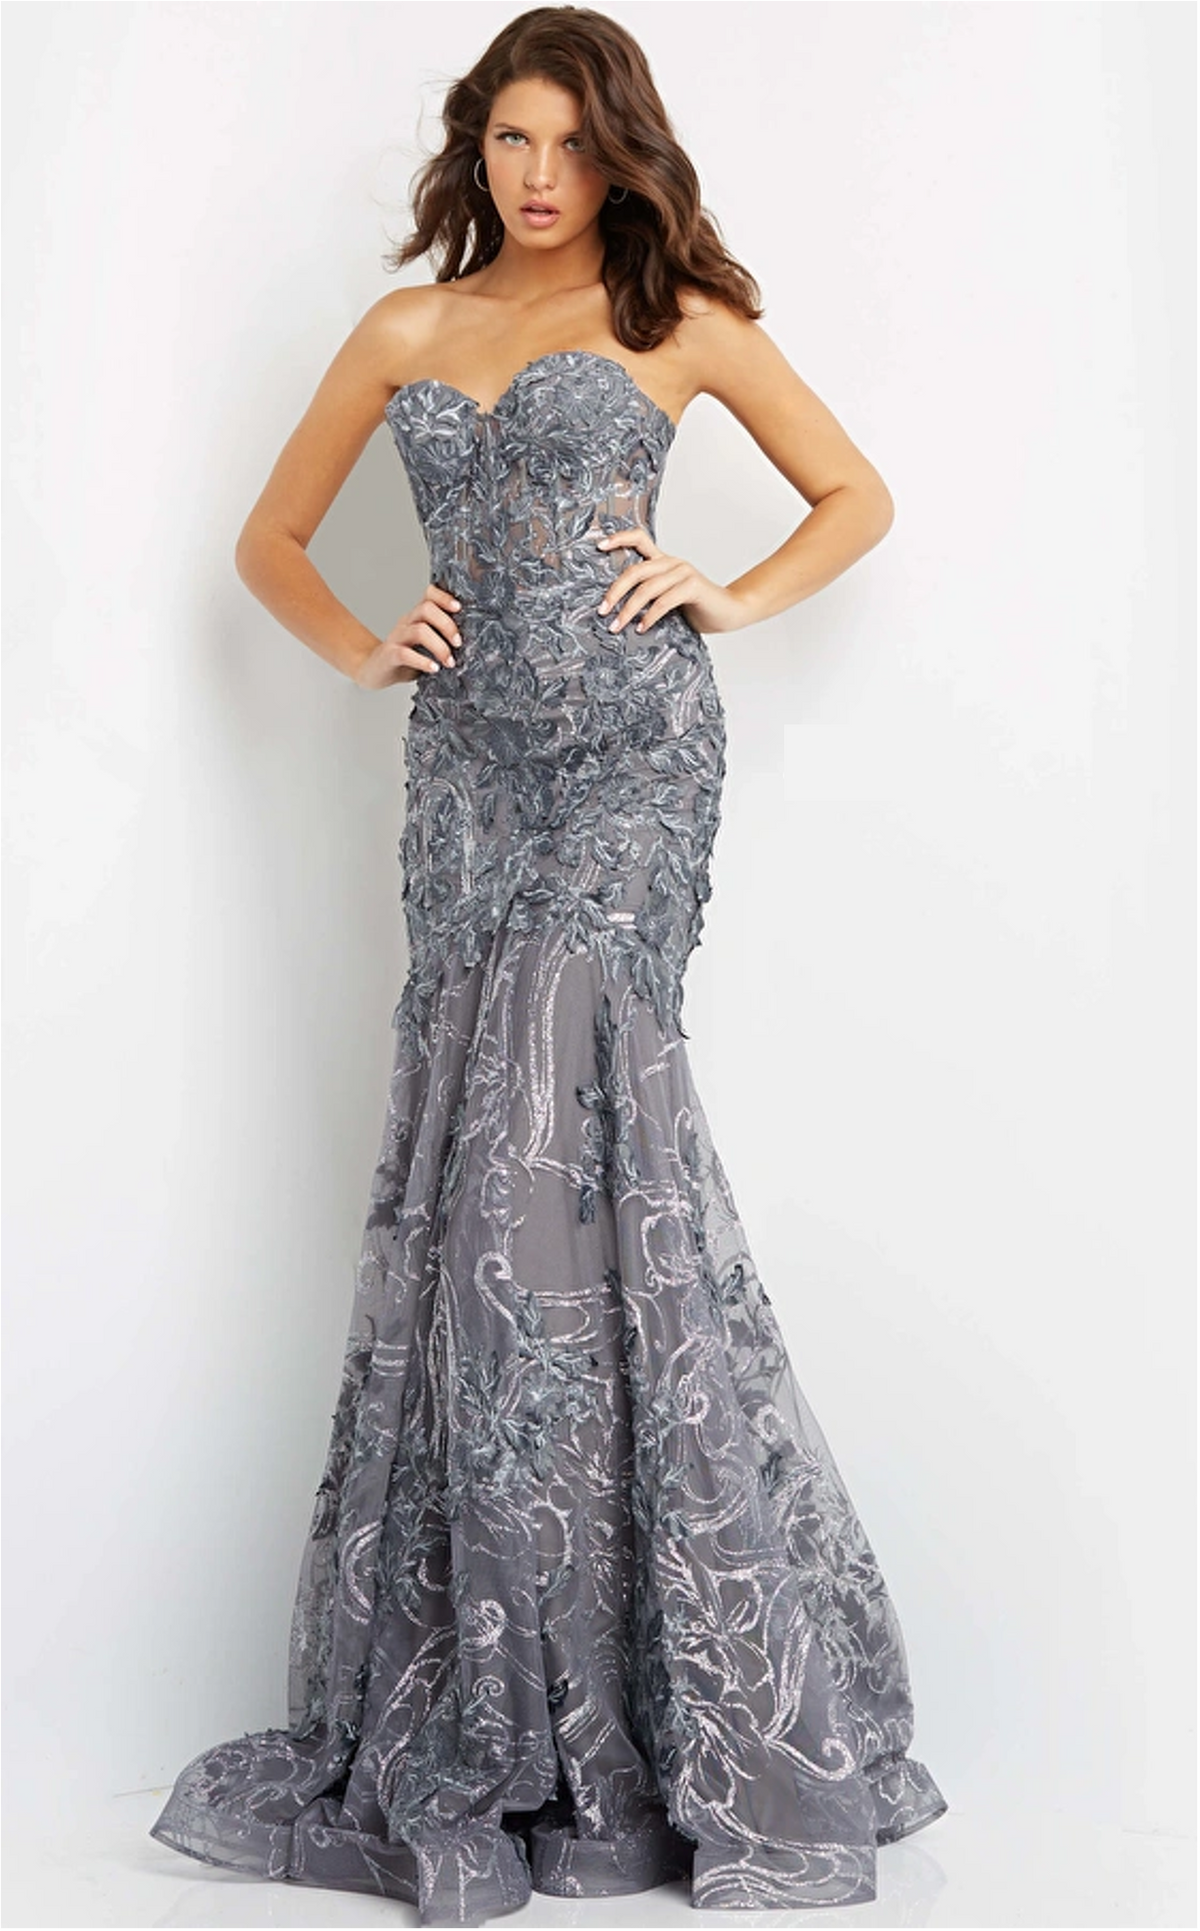 Jovani 07935 Floral Applique Mermaid Prom Dress - A captivating mermaid-style prom dress adorned with floral appliques and glitter embellishments. The strapless illusion corset bodice enhances the silhouette, making it an ideal choice for prom night.